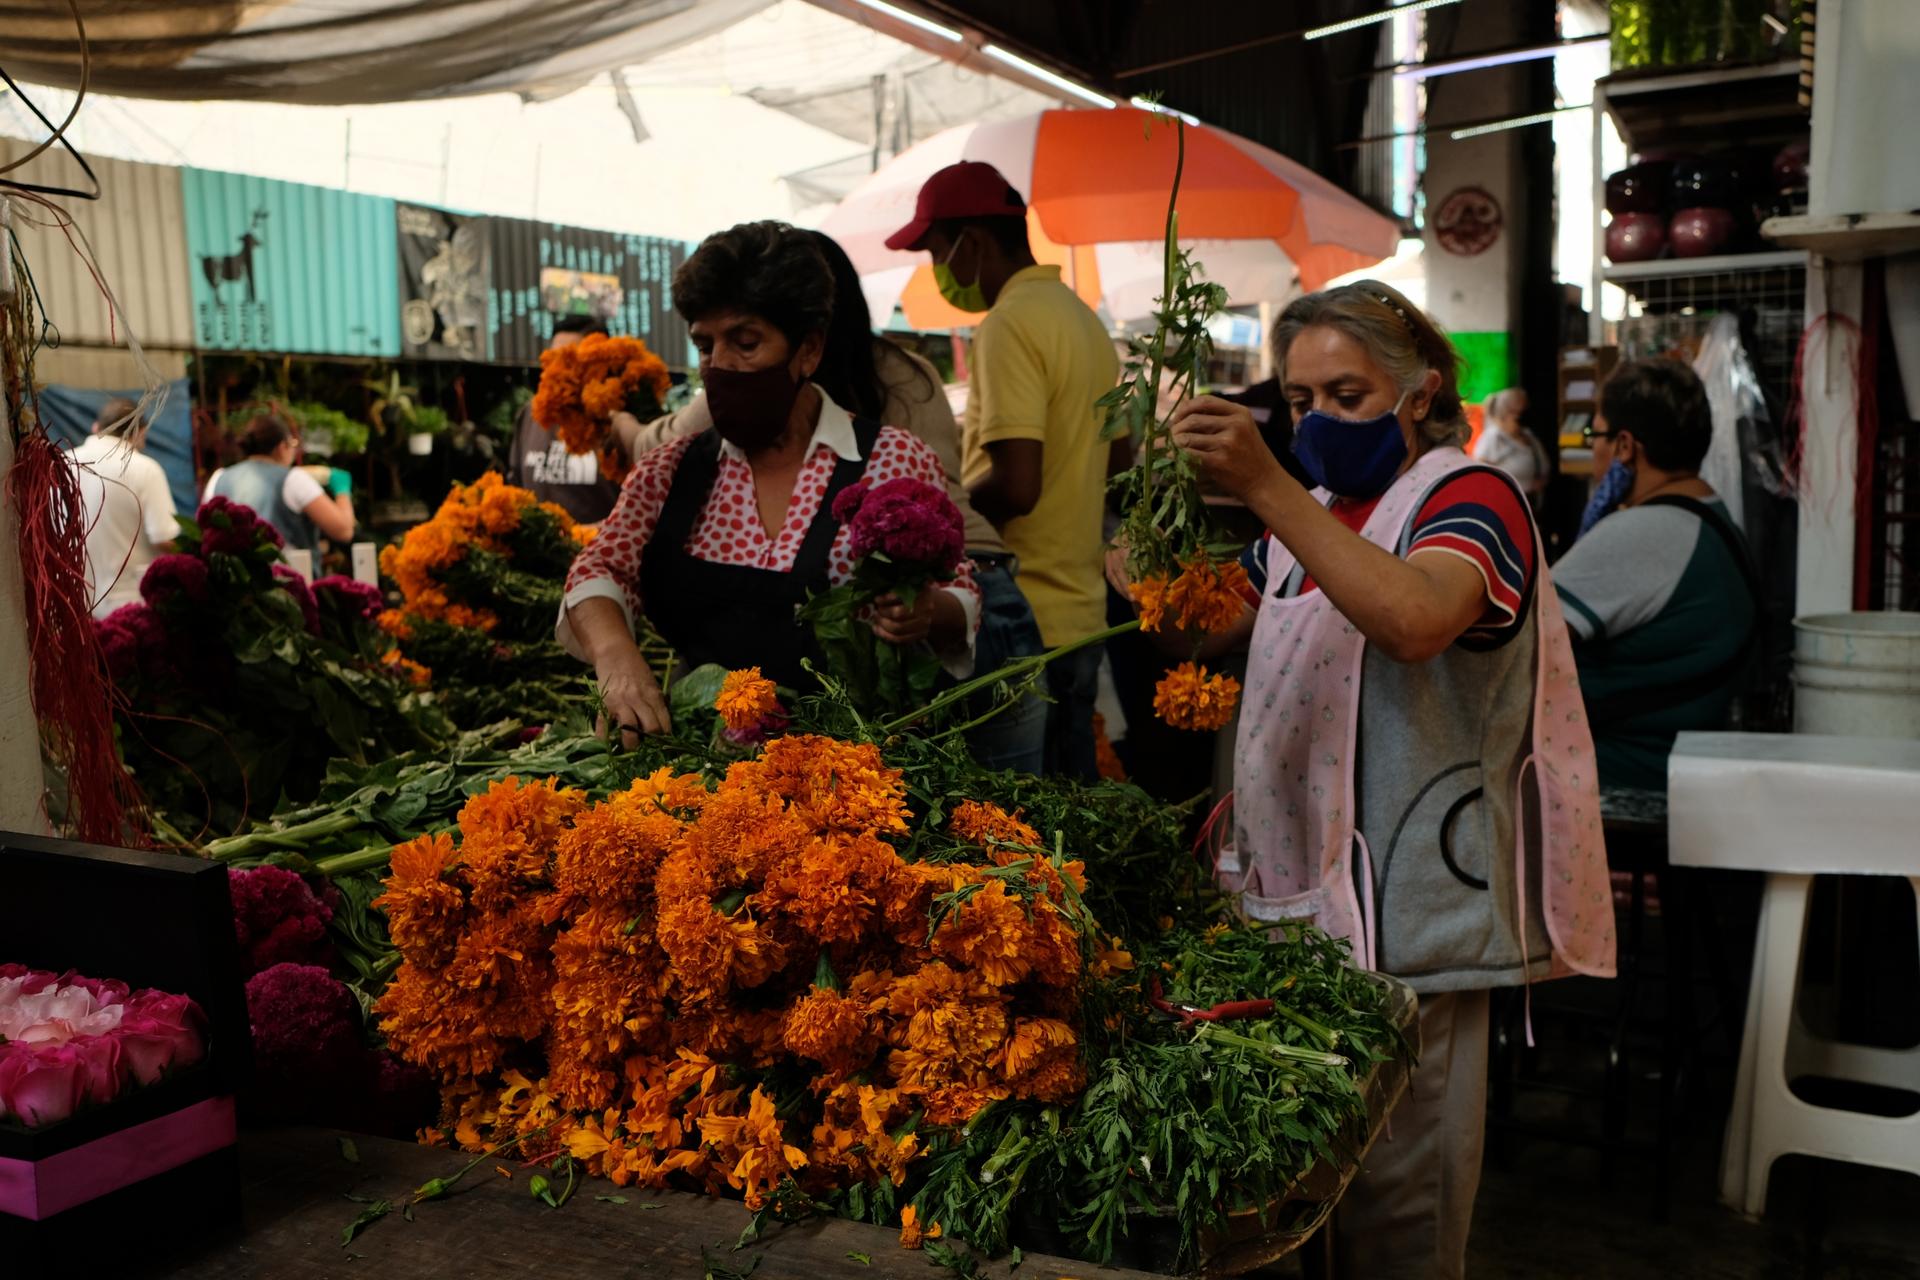 Flower vendors prep freshly harvested marigolds to sell. Many vendors agree that this year sales are very slow.